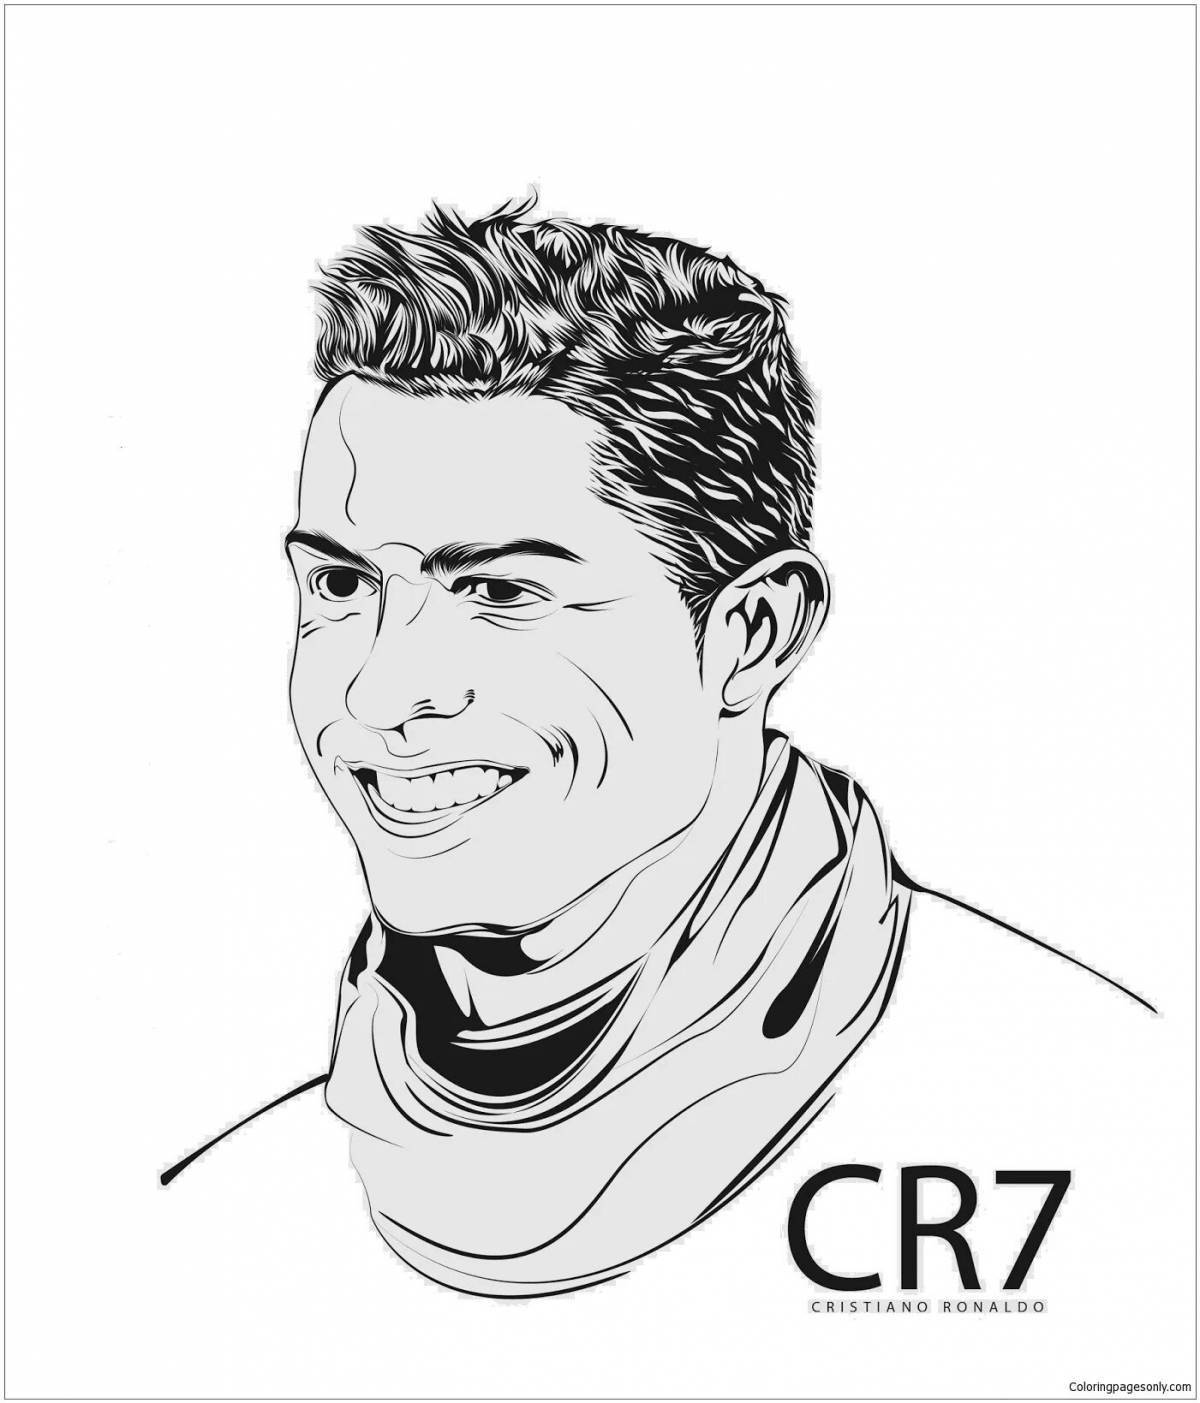 Coloring page colorful football player ronaldo